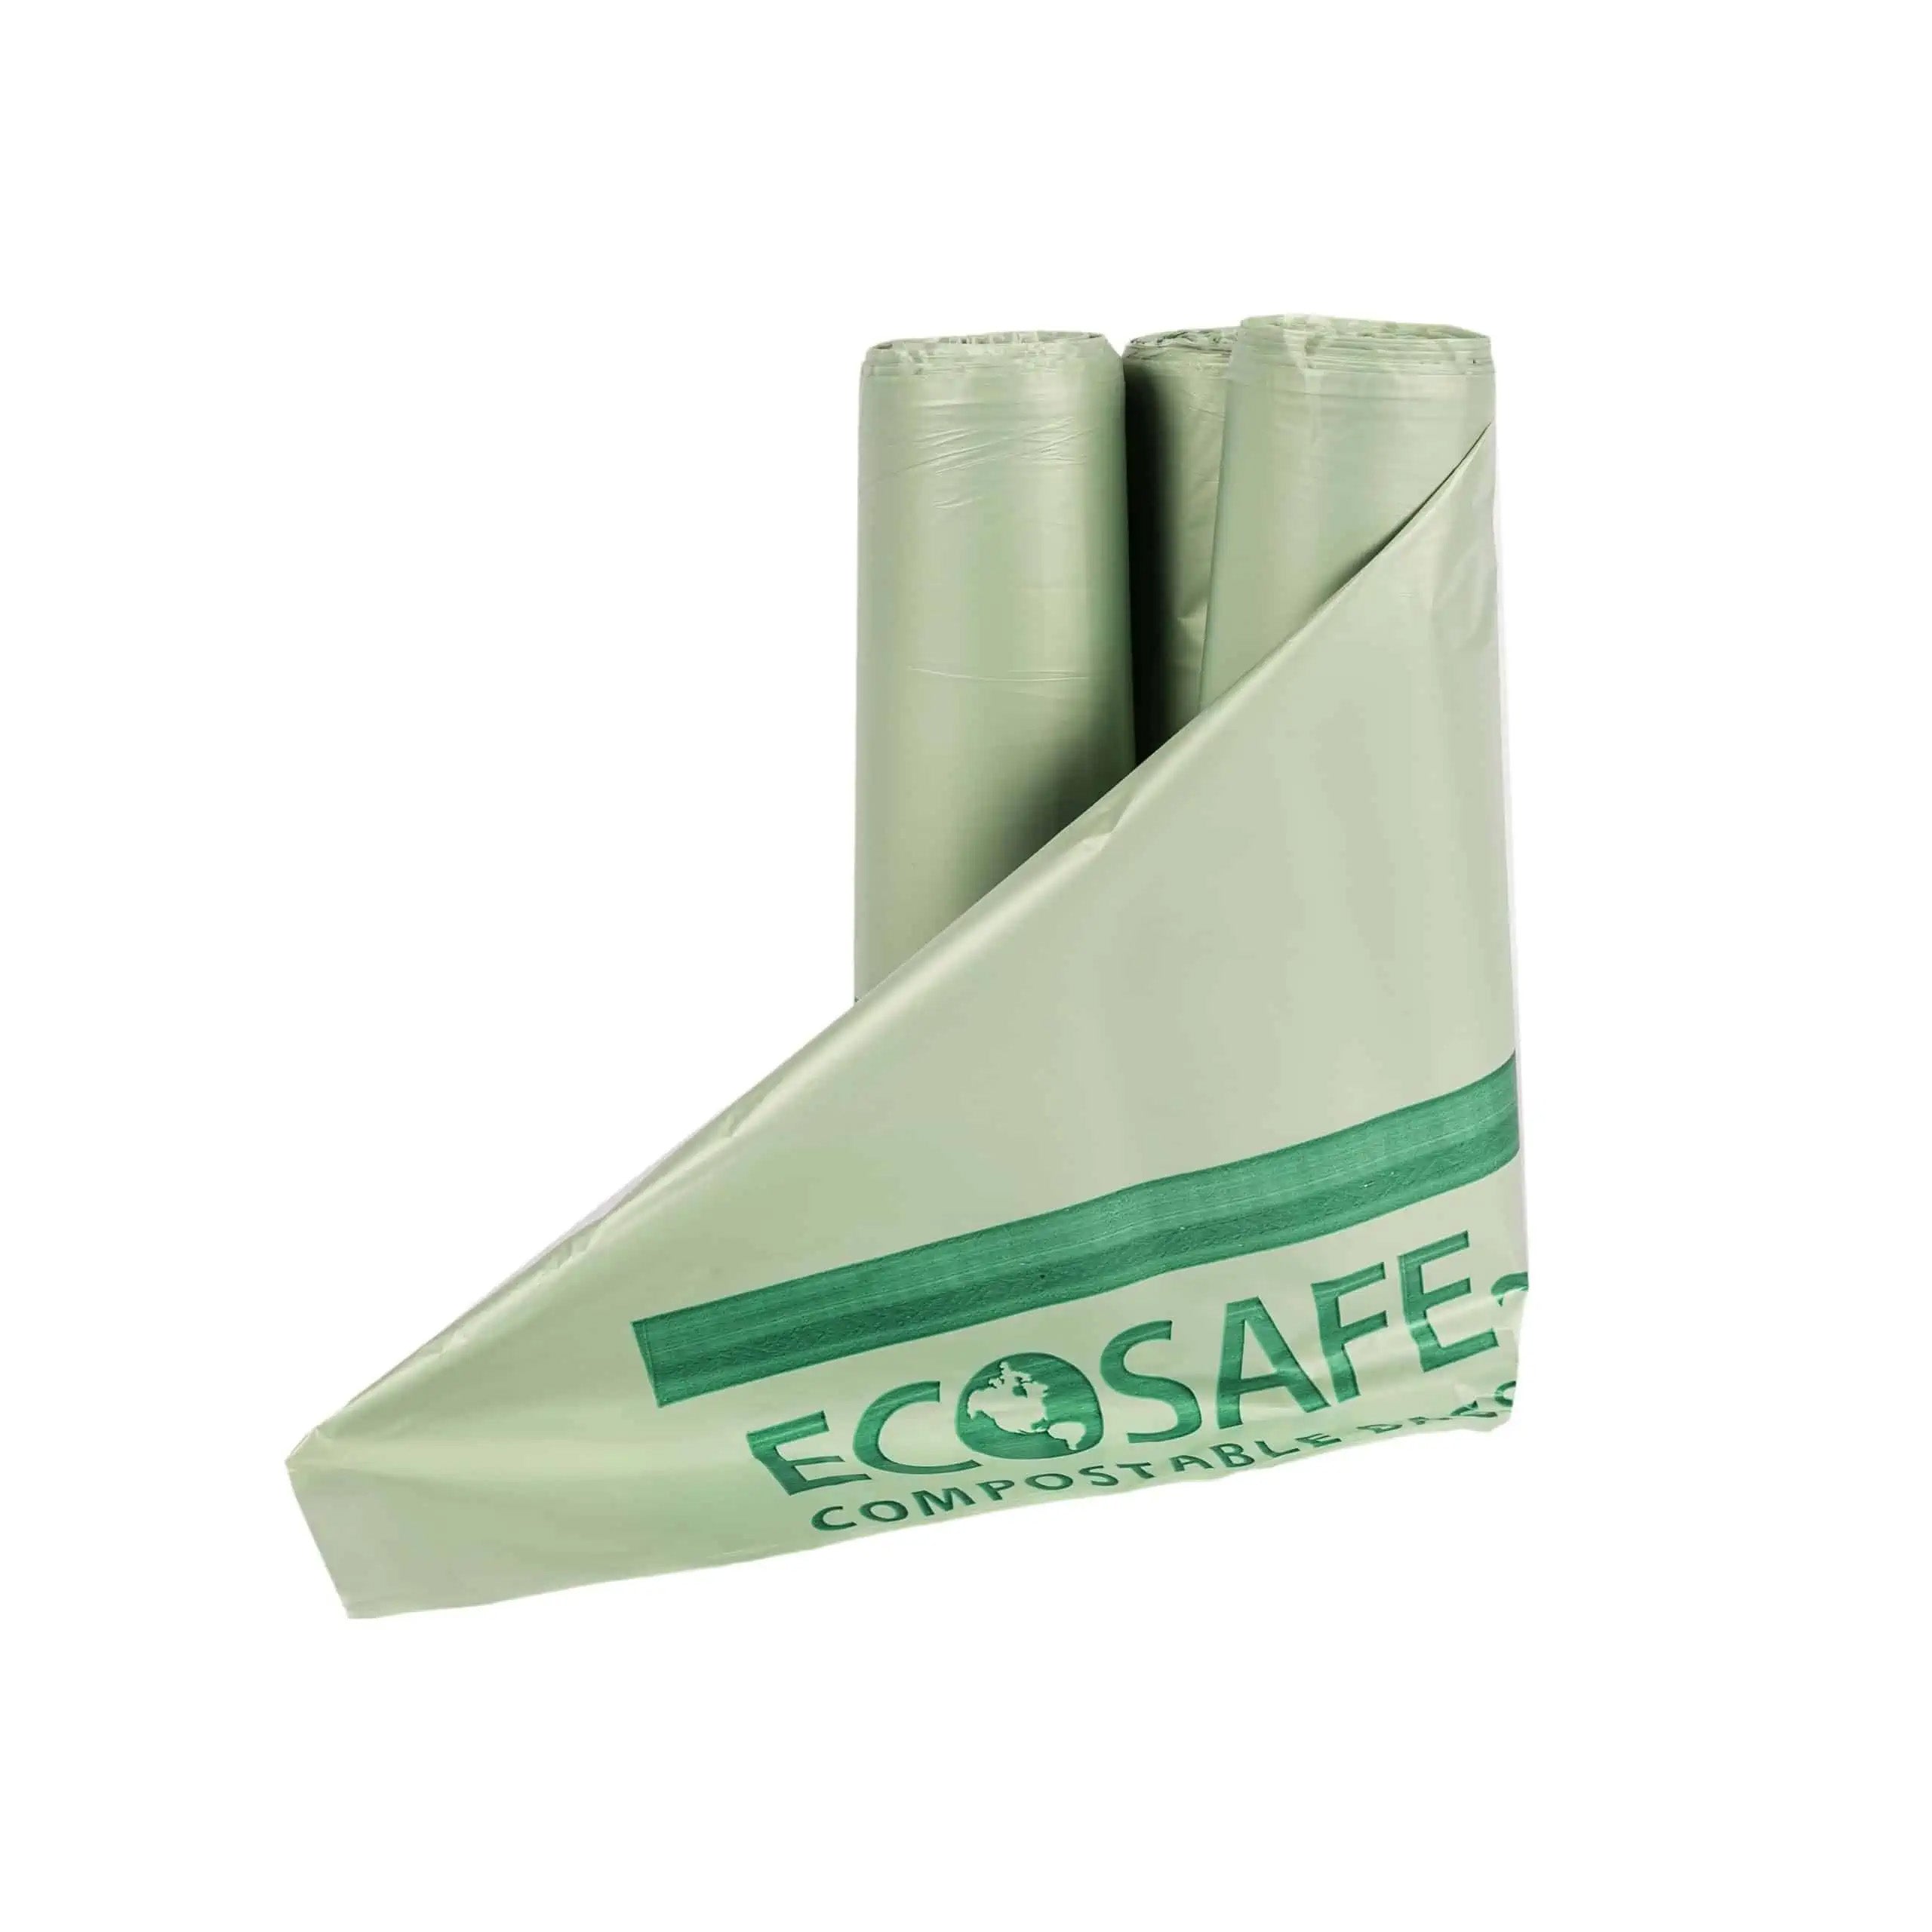 https://cdn.shopify.com/s/files/1/0612/3690/4162/products/EcoSafe-Compostable-Bags-HB3955-85-Rolls-min-scaled.jpg?v=1660672251